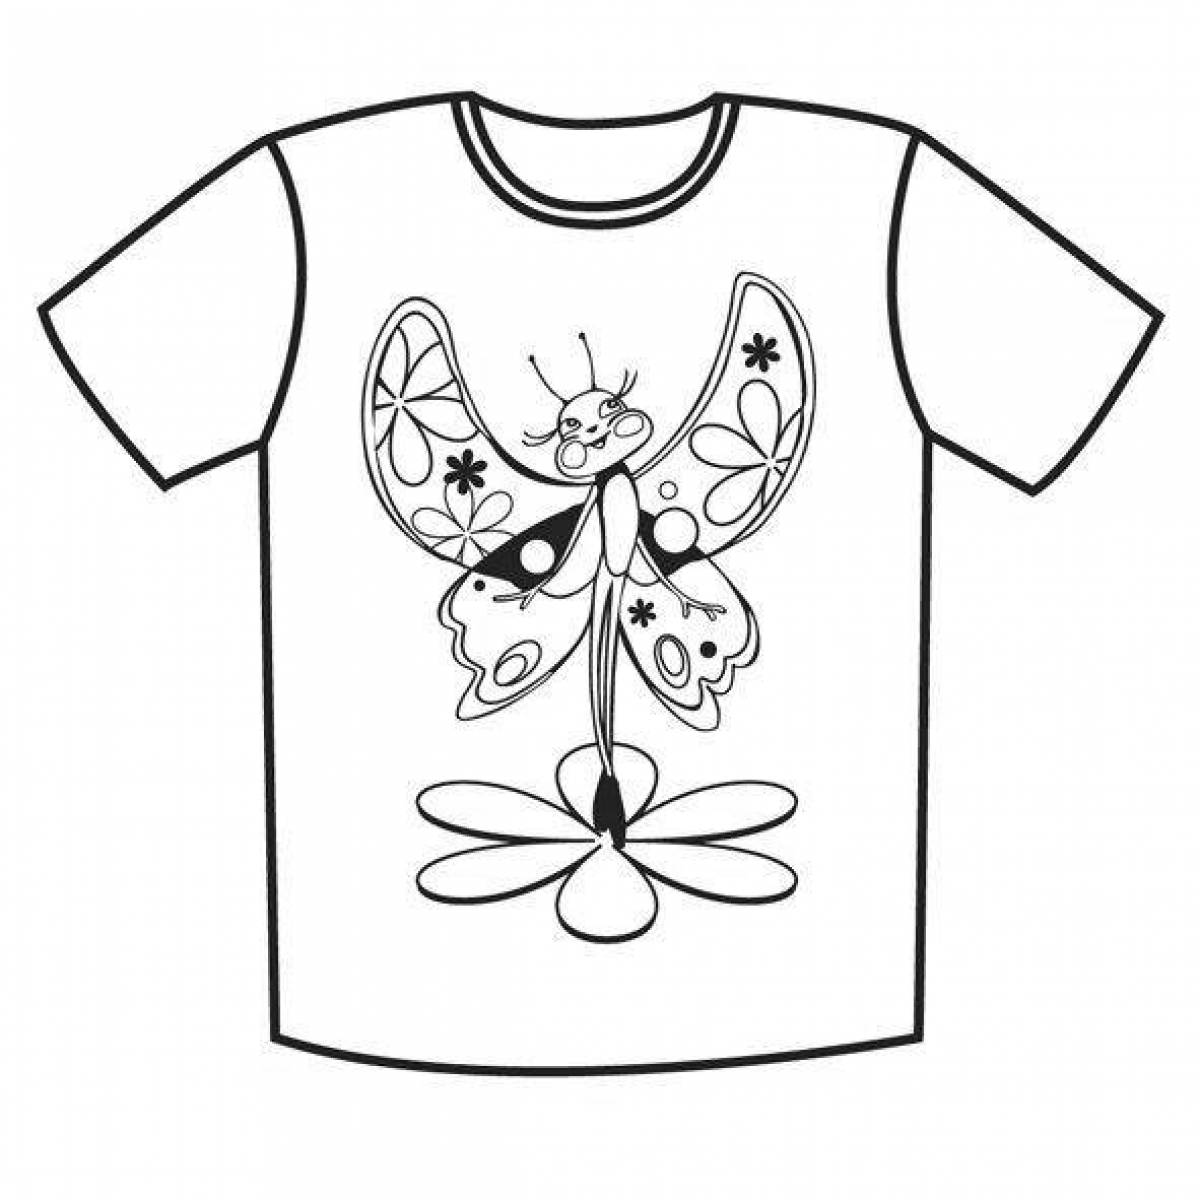 Colorful coloring t-shirt for kids